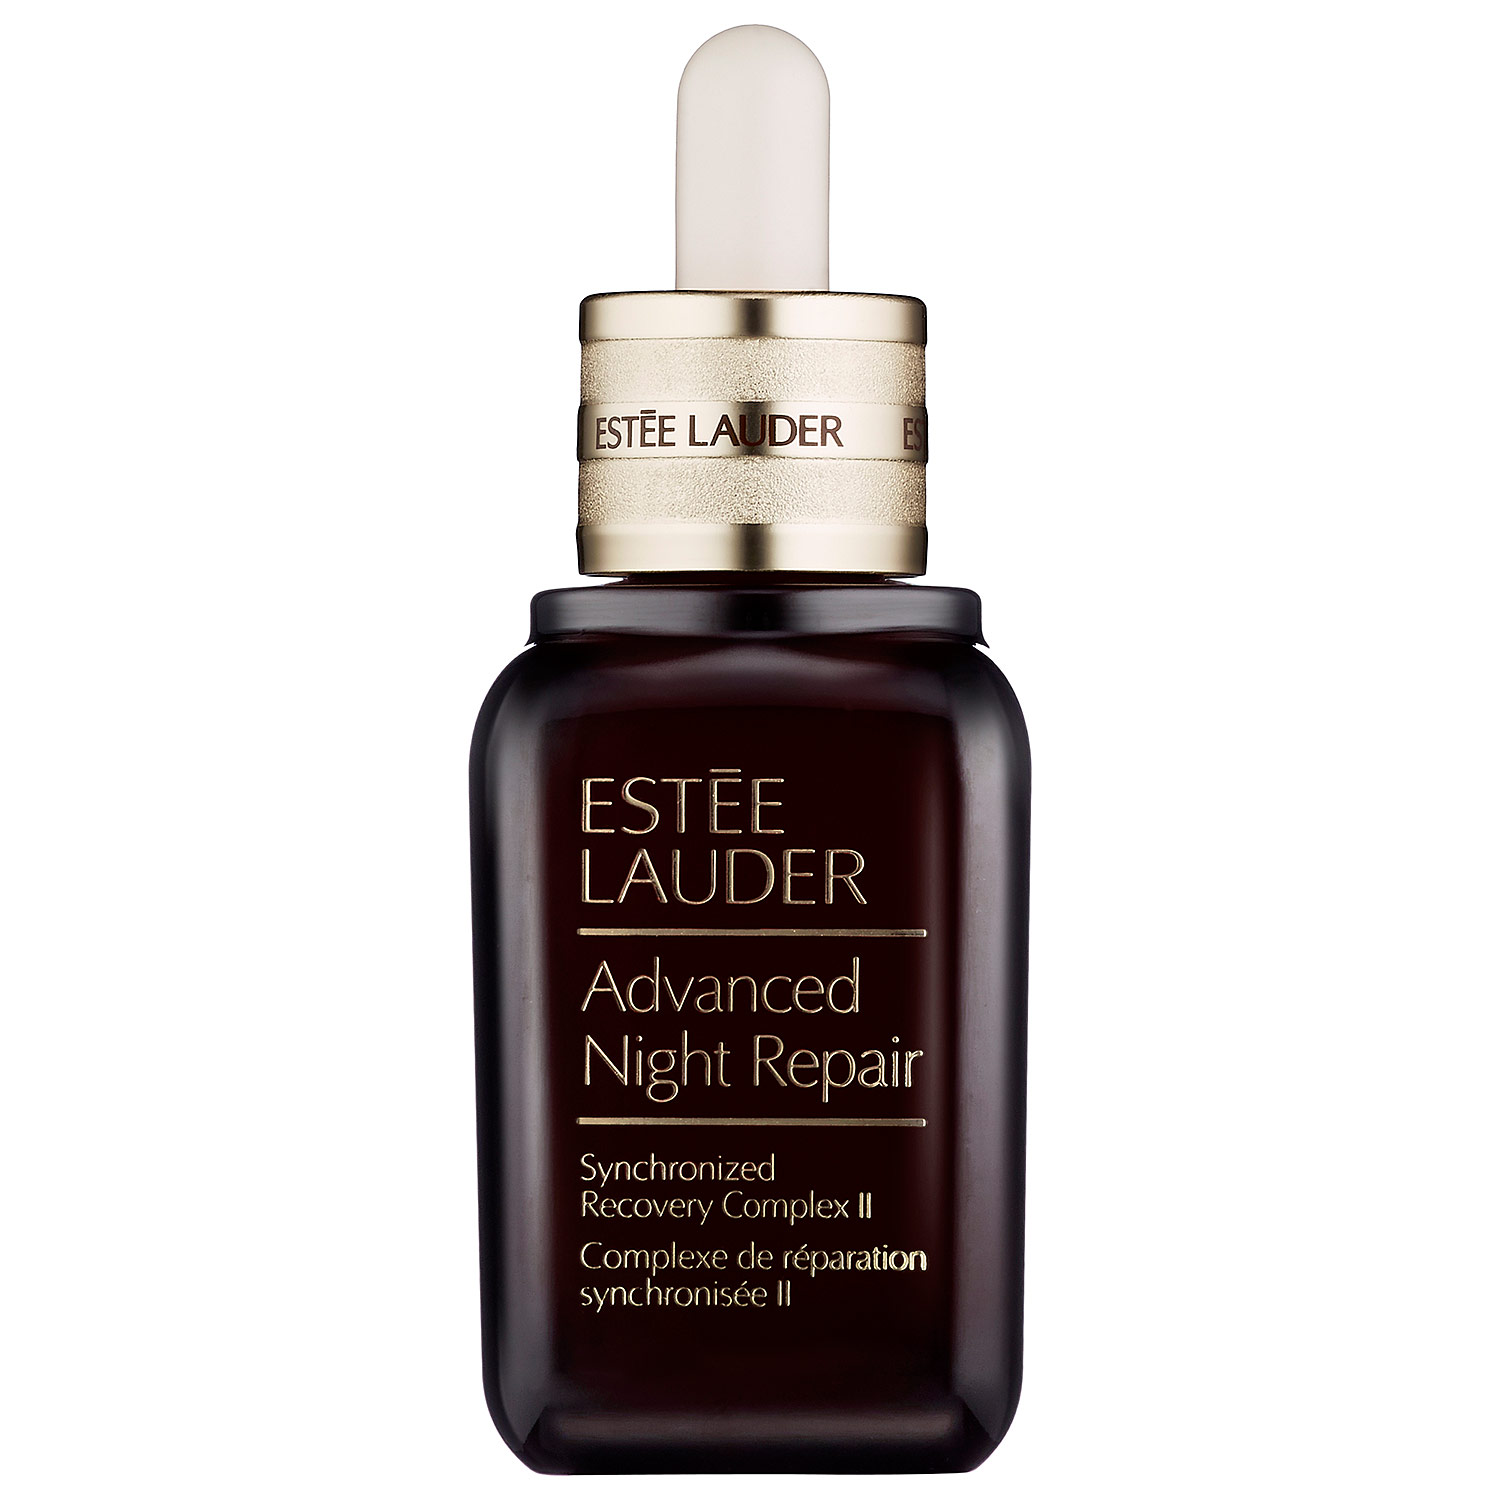 (Deal: 20% Off) Estee Lauder Advanced Night Repair Synchronized Recovery Complex II Face Serum, 1.7 Oz - image 1 of 6